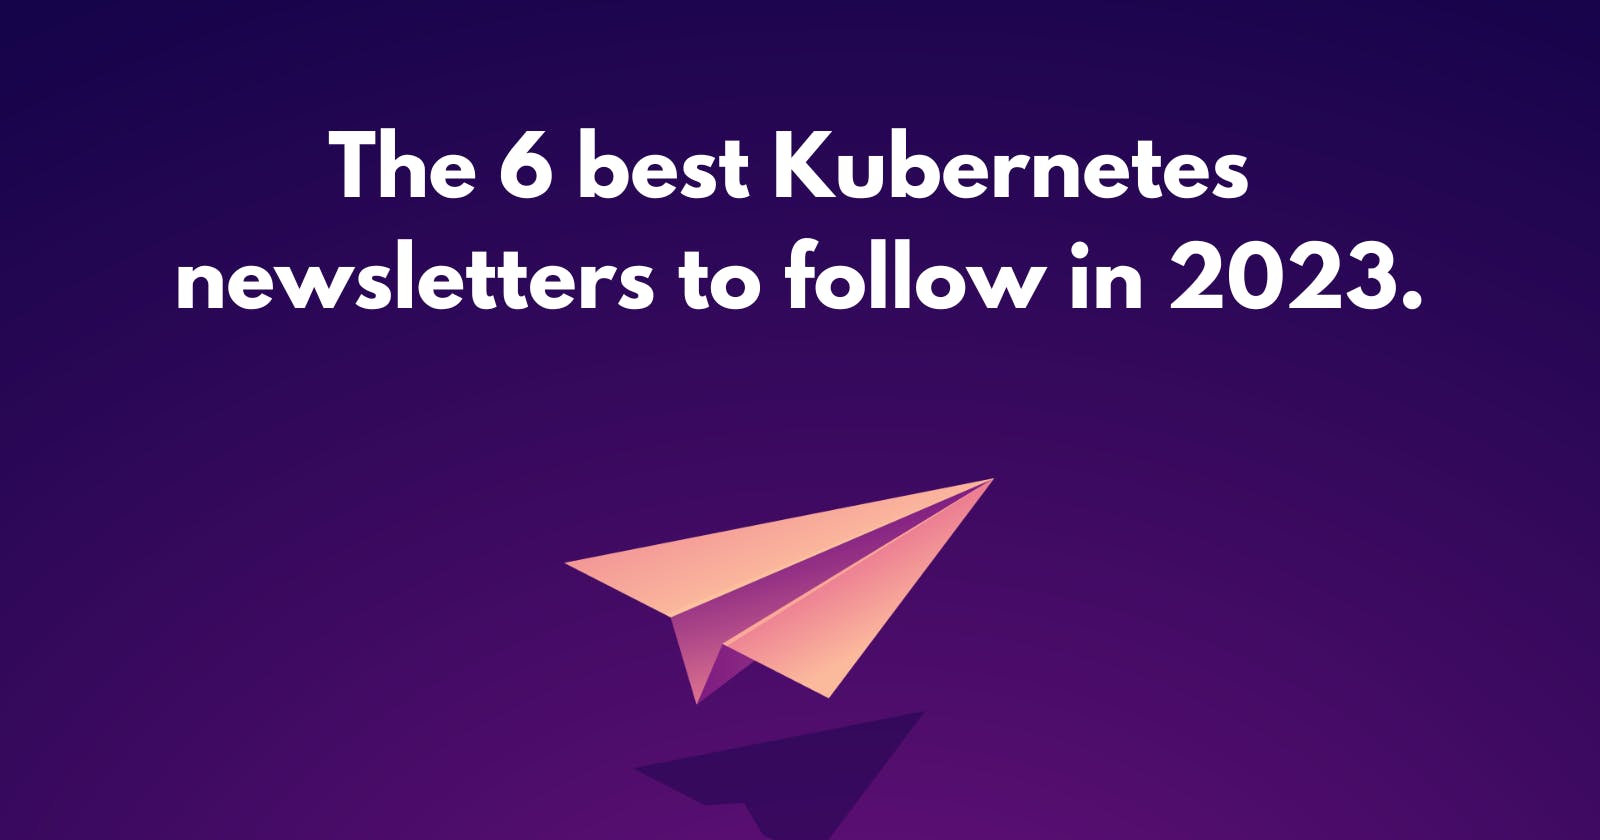 Here are the 6 best Kubernetes newsletters to follow in 2023.